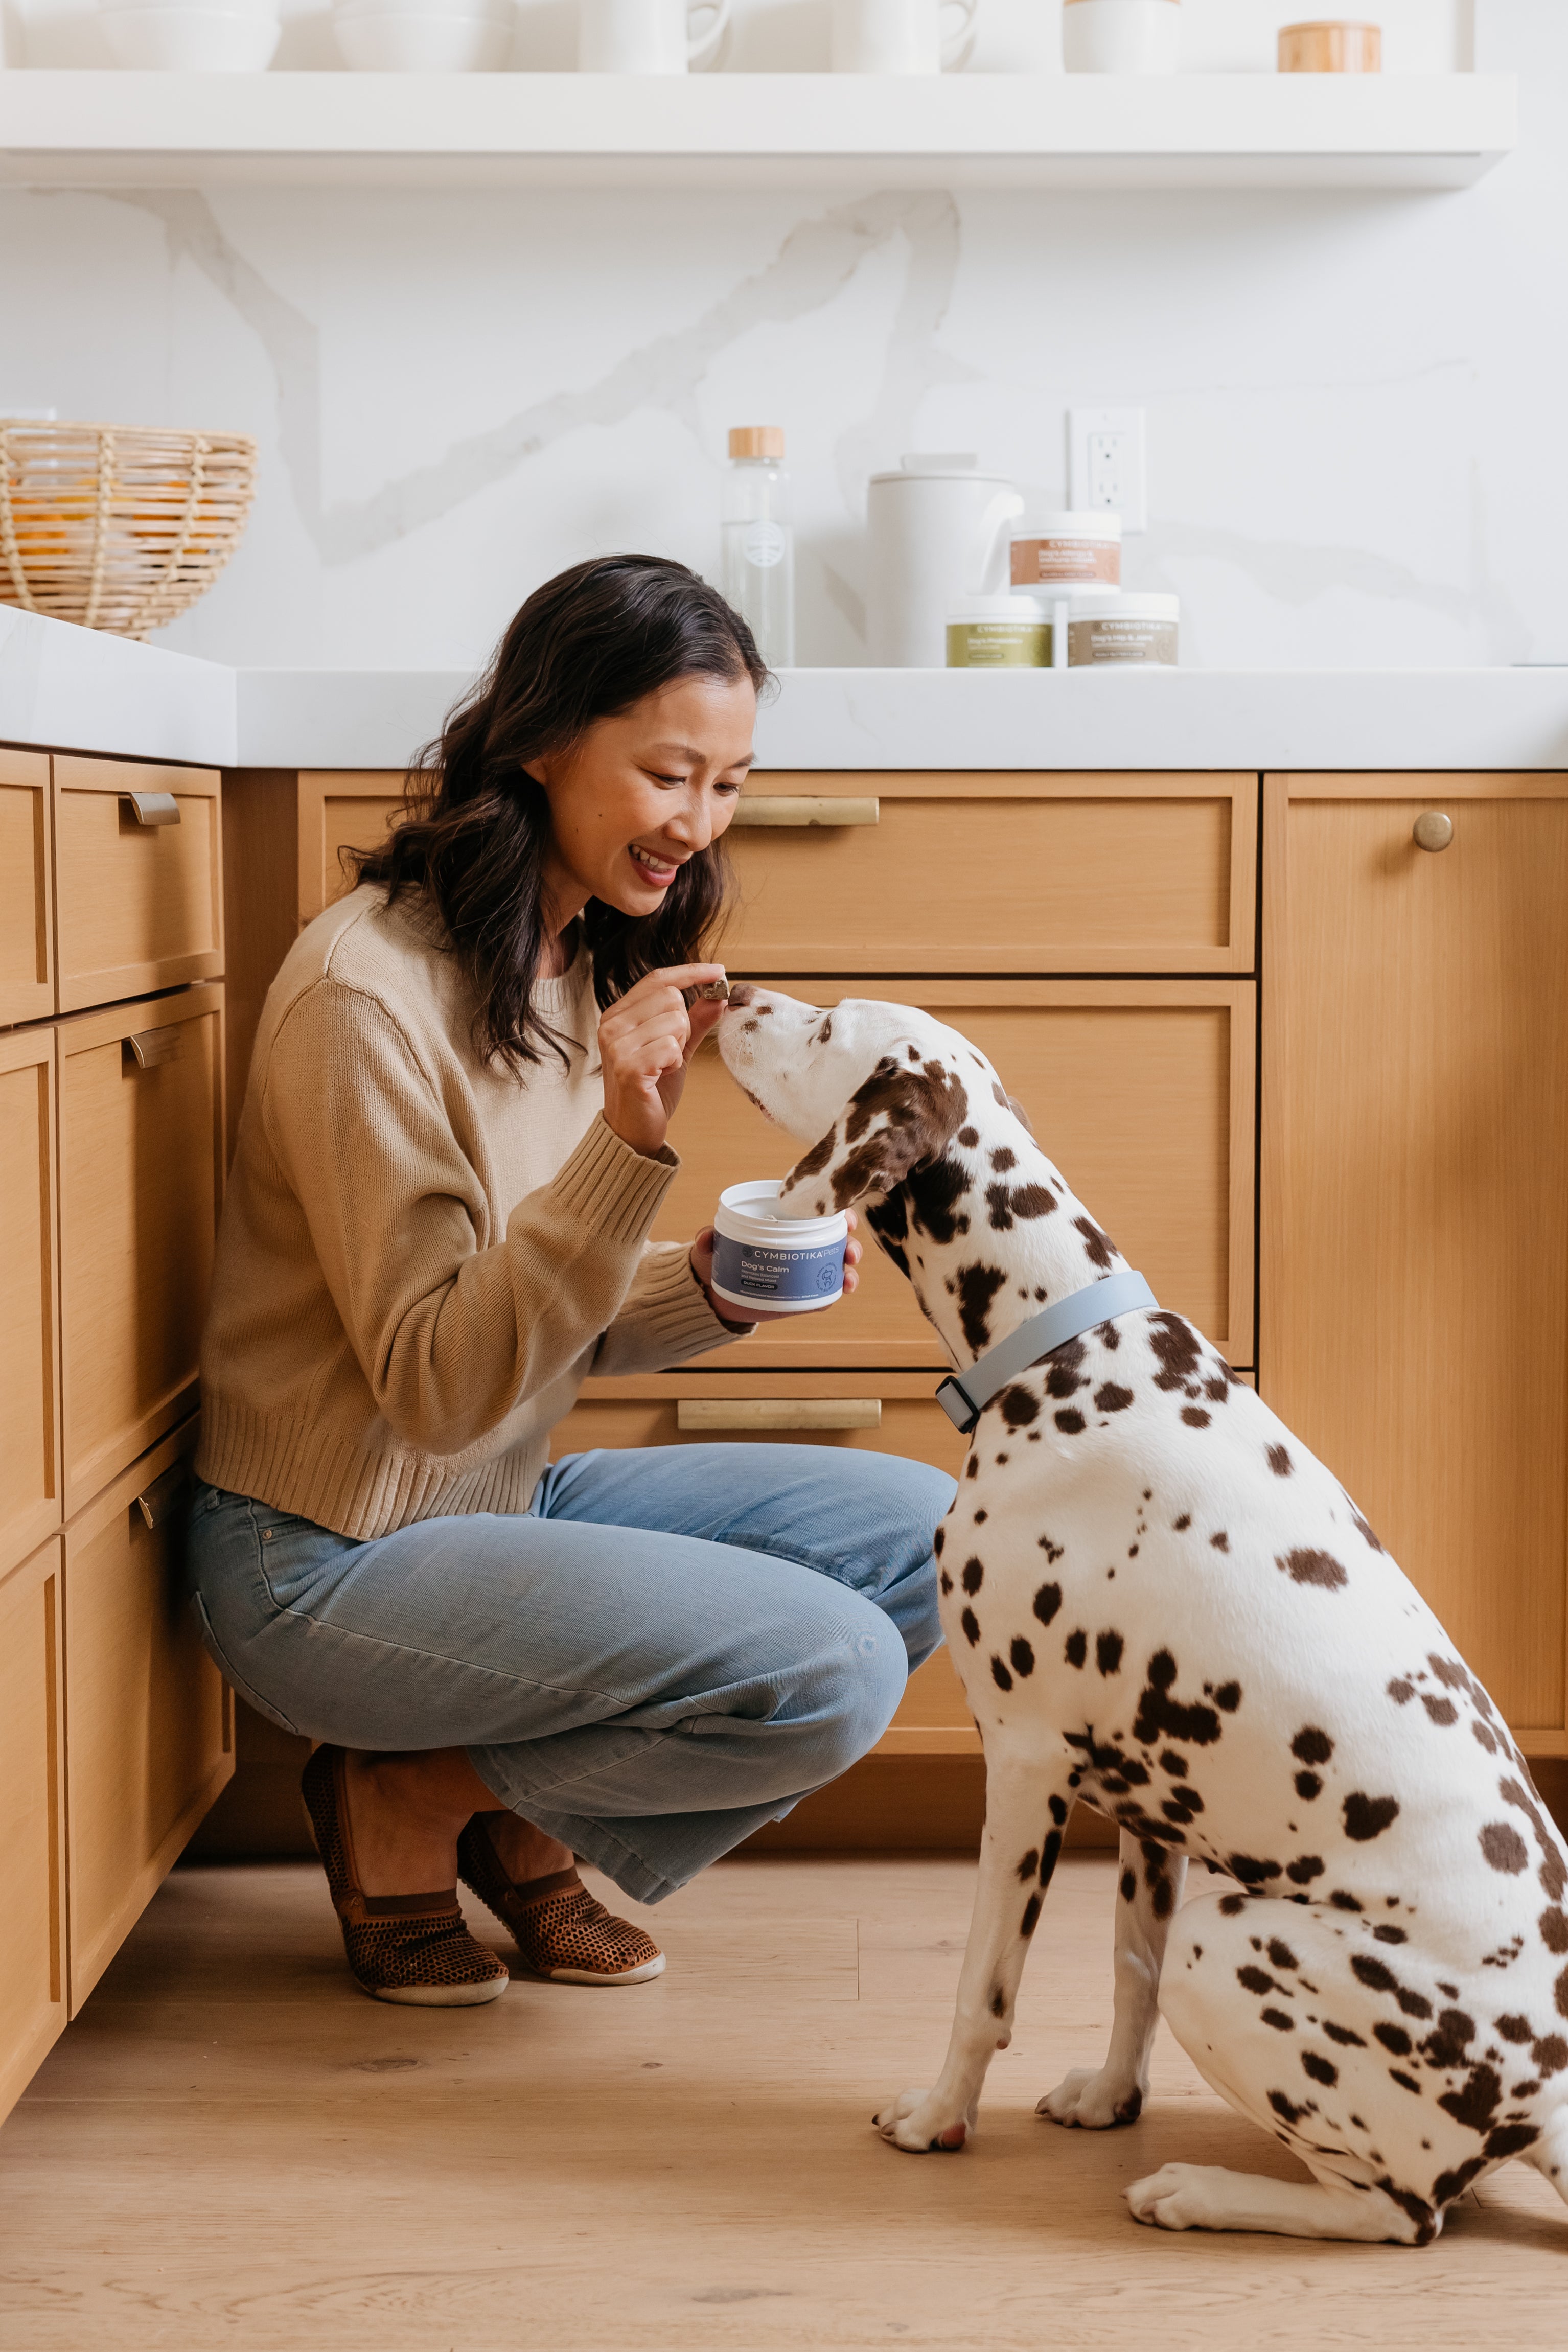 Cymbiotika Launches New Pet Line, Elevating Pet Health with 4 New Supplements: Probiotic+, Calm, Hip & Joint, and Allergy & Immune Health